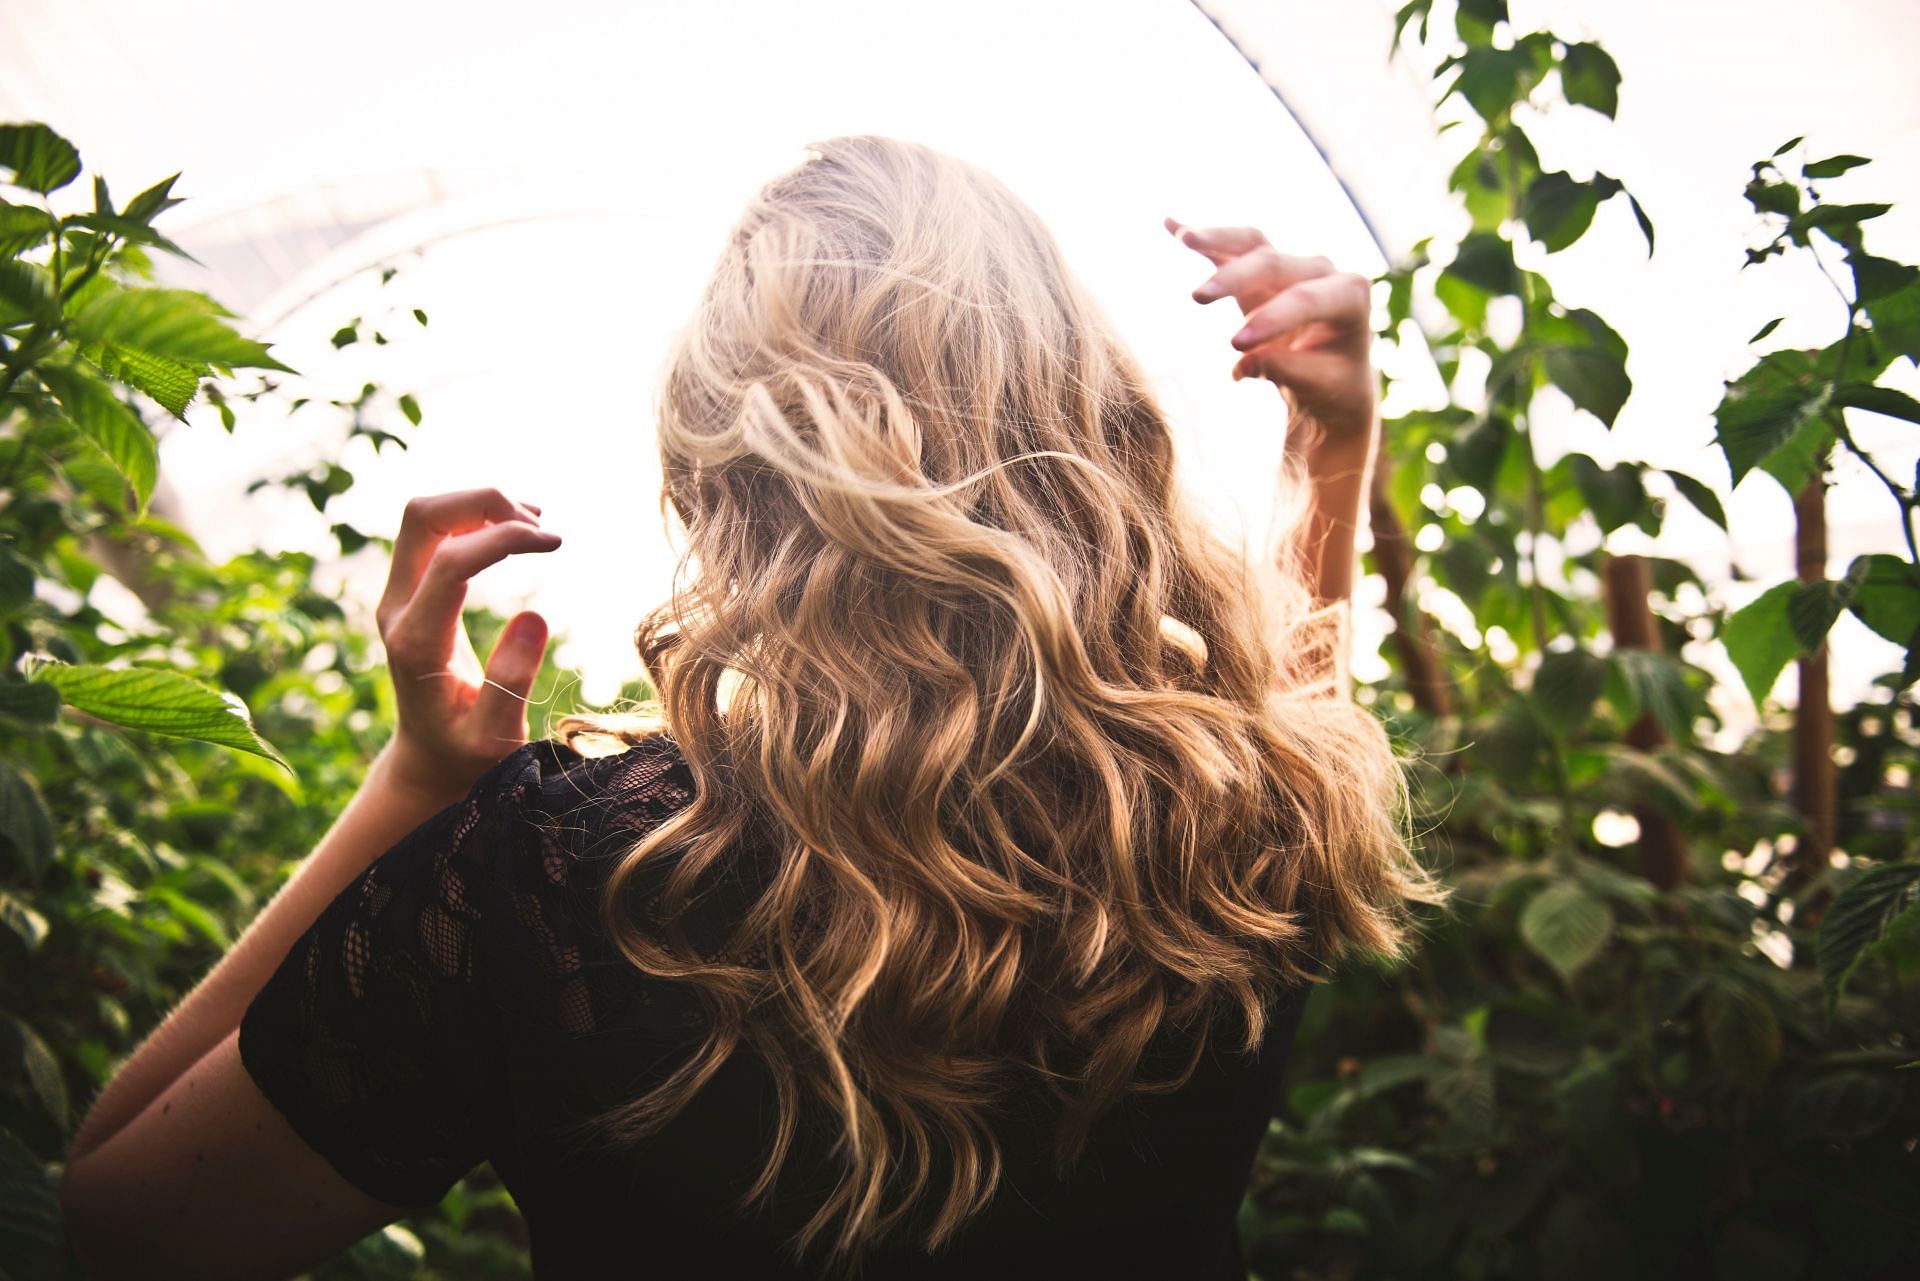 May take a while for hair growth as it depends on various factors. (Image via Pexels / Tim Mossholder)